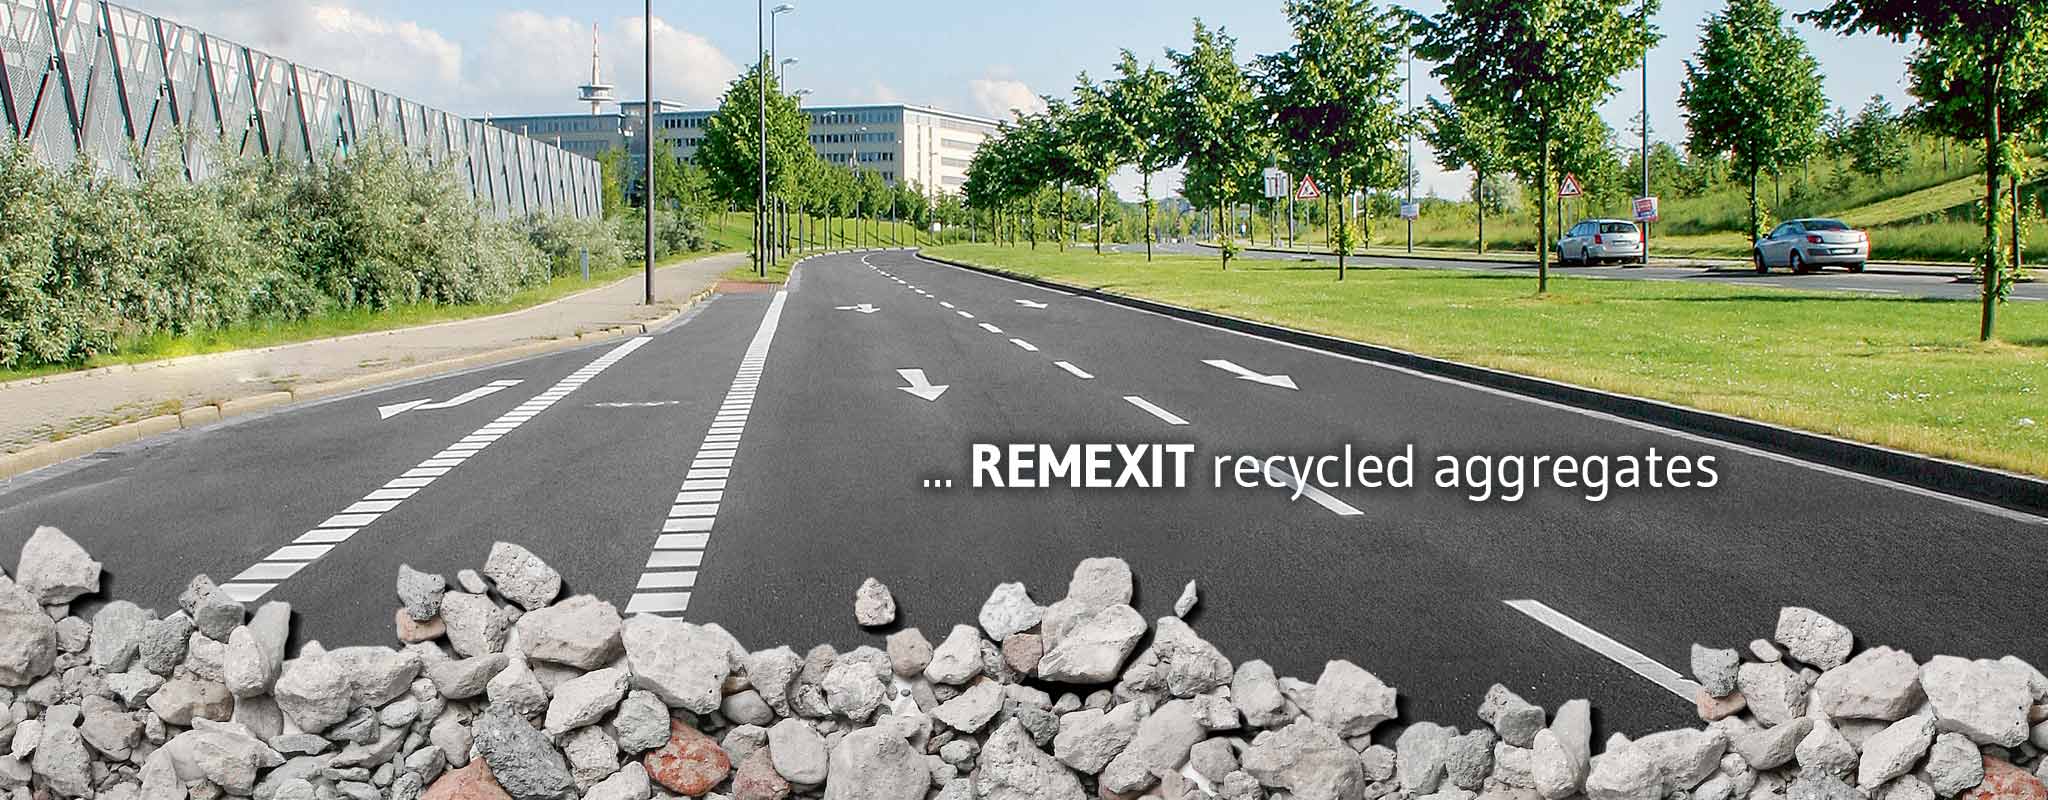 Mineral alternatives from CDM waste: recycled aggregates REMEXIT rx_sol_home-slide_E_remexit_EN_01b.jpg